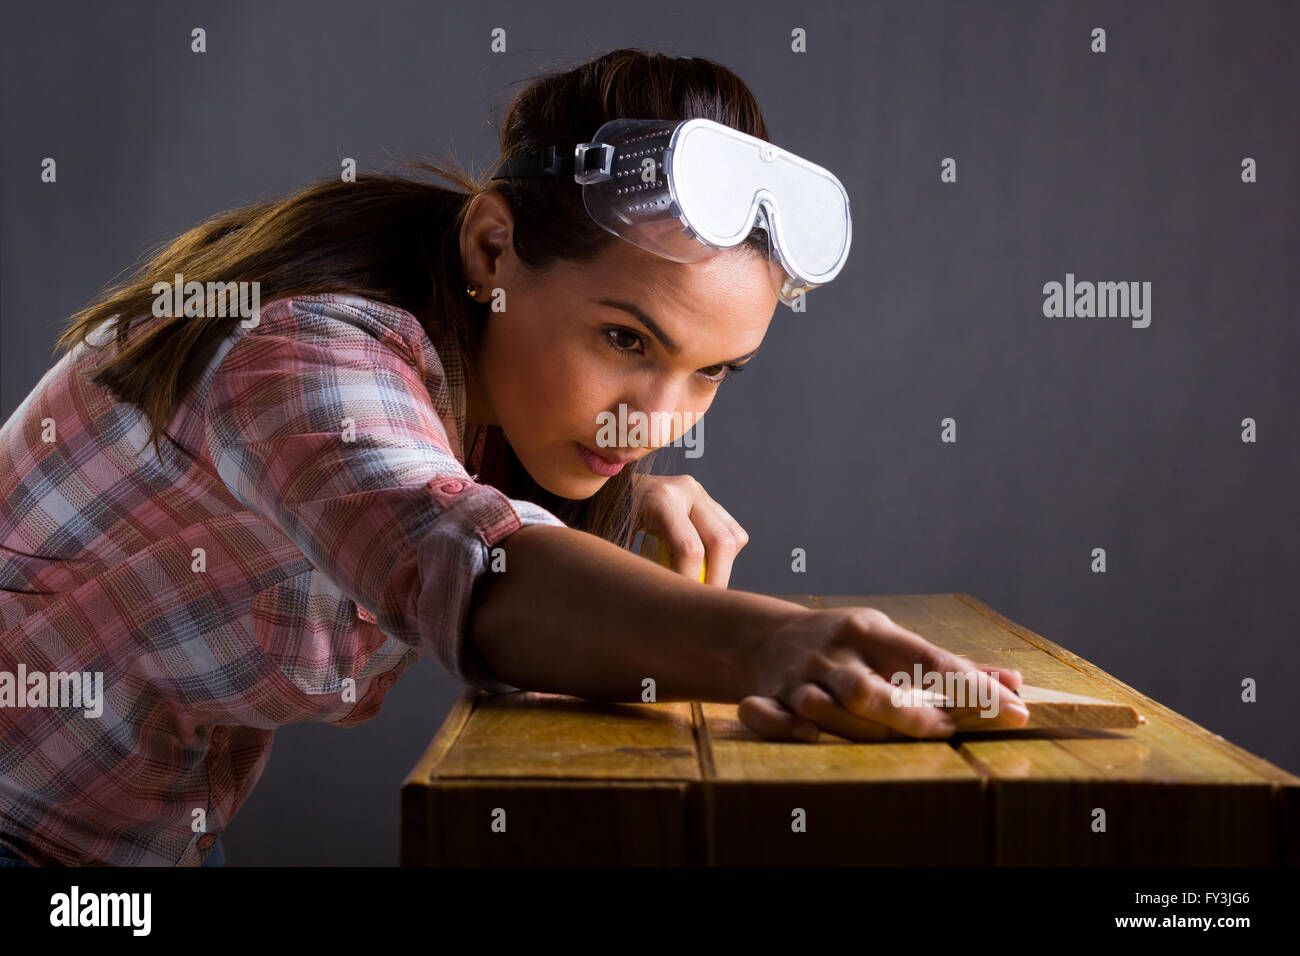 Young adult Hispanic woman measuring a wooden board with a tape measure Stock Photo